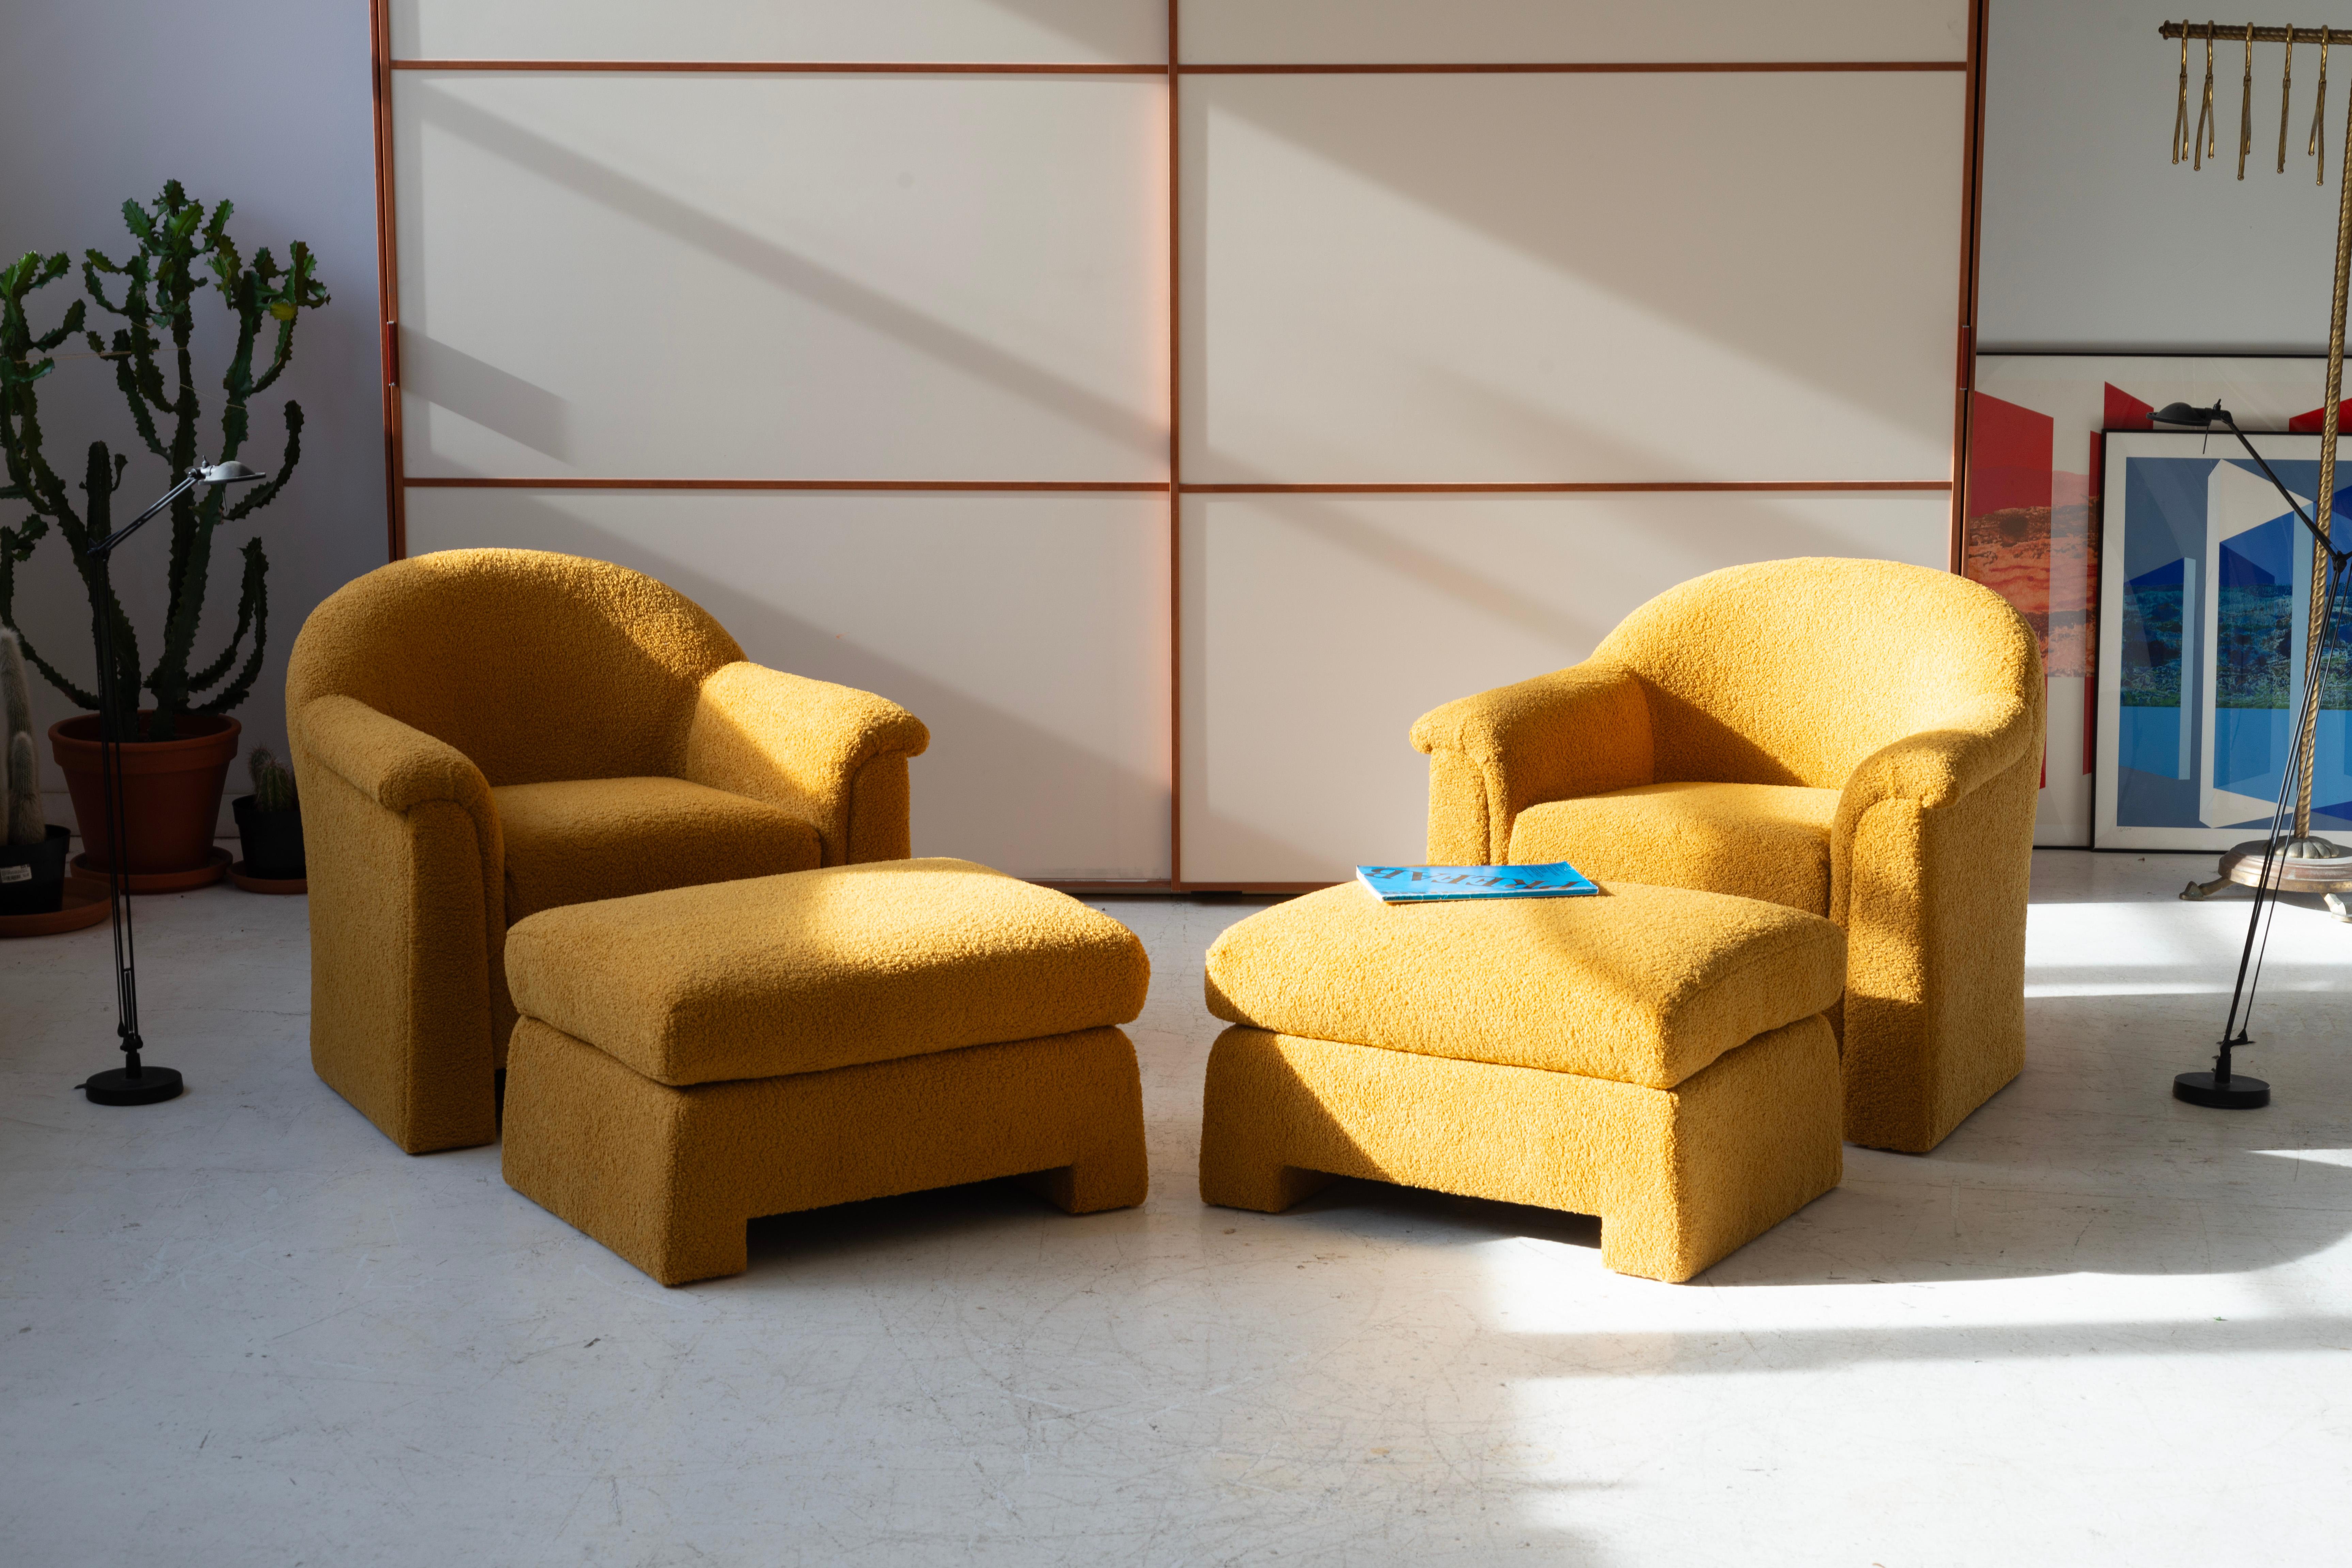 These post-modern lounge chairs and matching ottomans feature a sleek, minimalist design with gentle curves, embodying contemporary style. Upholstered in high-quality ochre-colored boucle, they offer a warm, textured look. Filled with new foam,